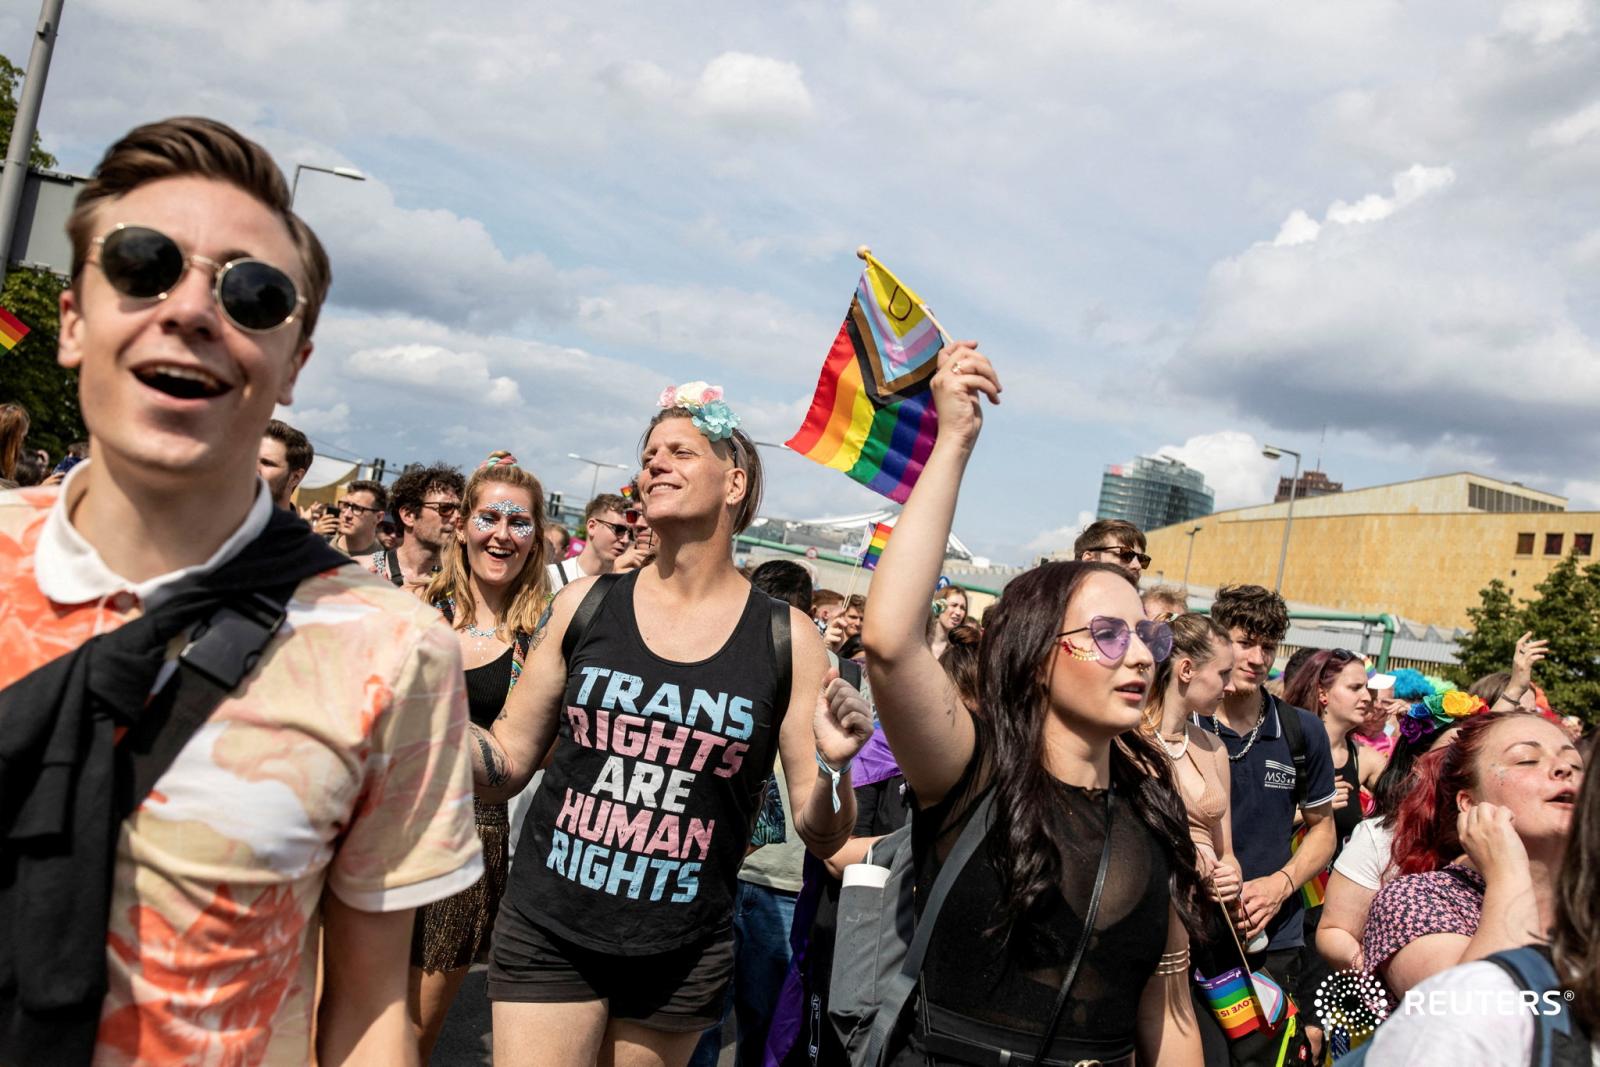 NEWS - German LGBTQ activist warns over 'worrying' hate crime rise for REUTERS